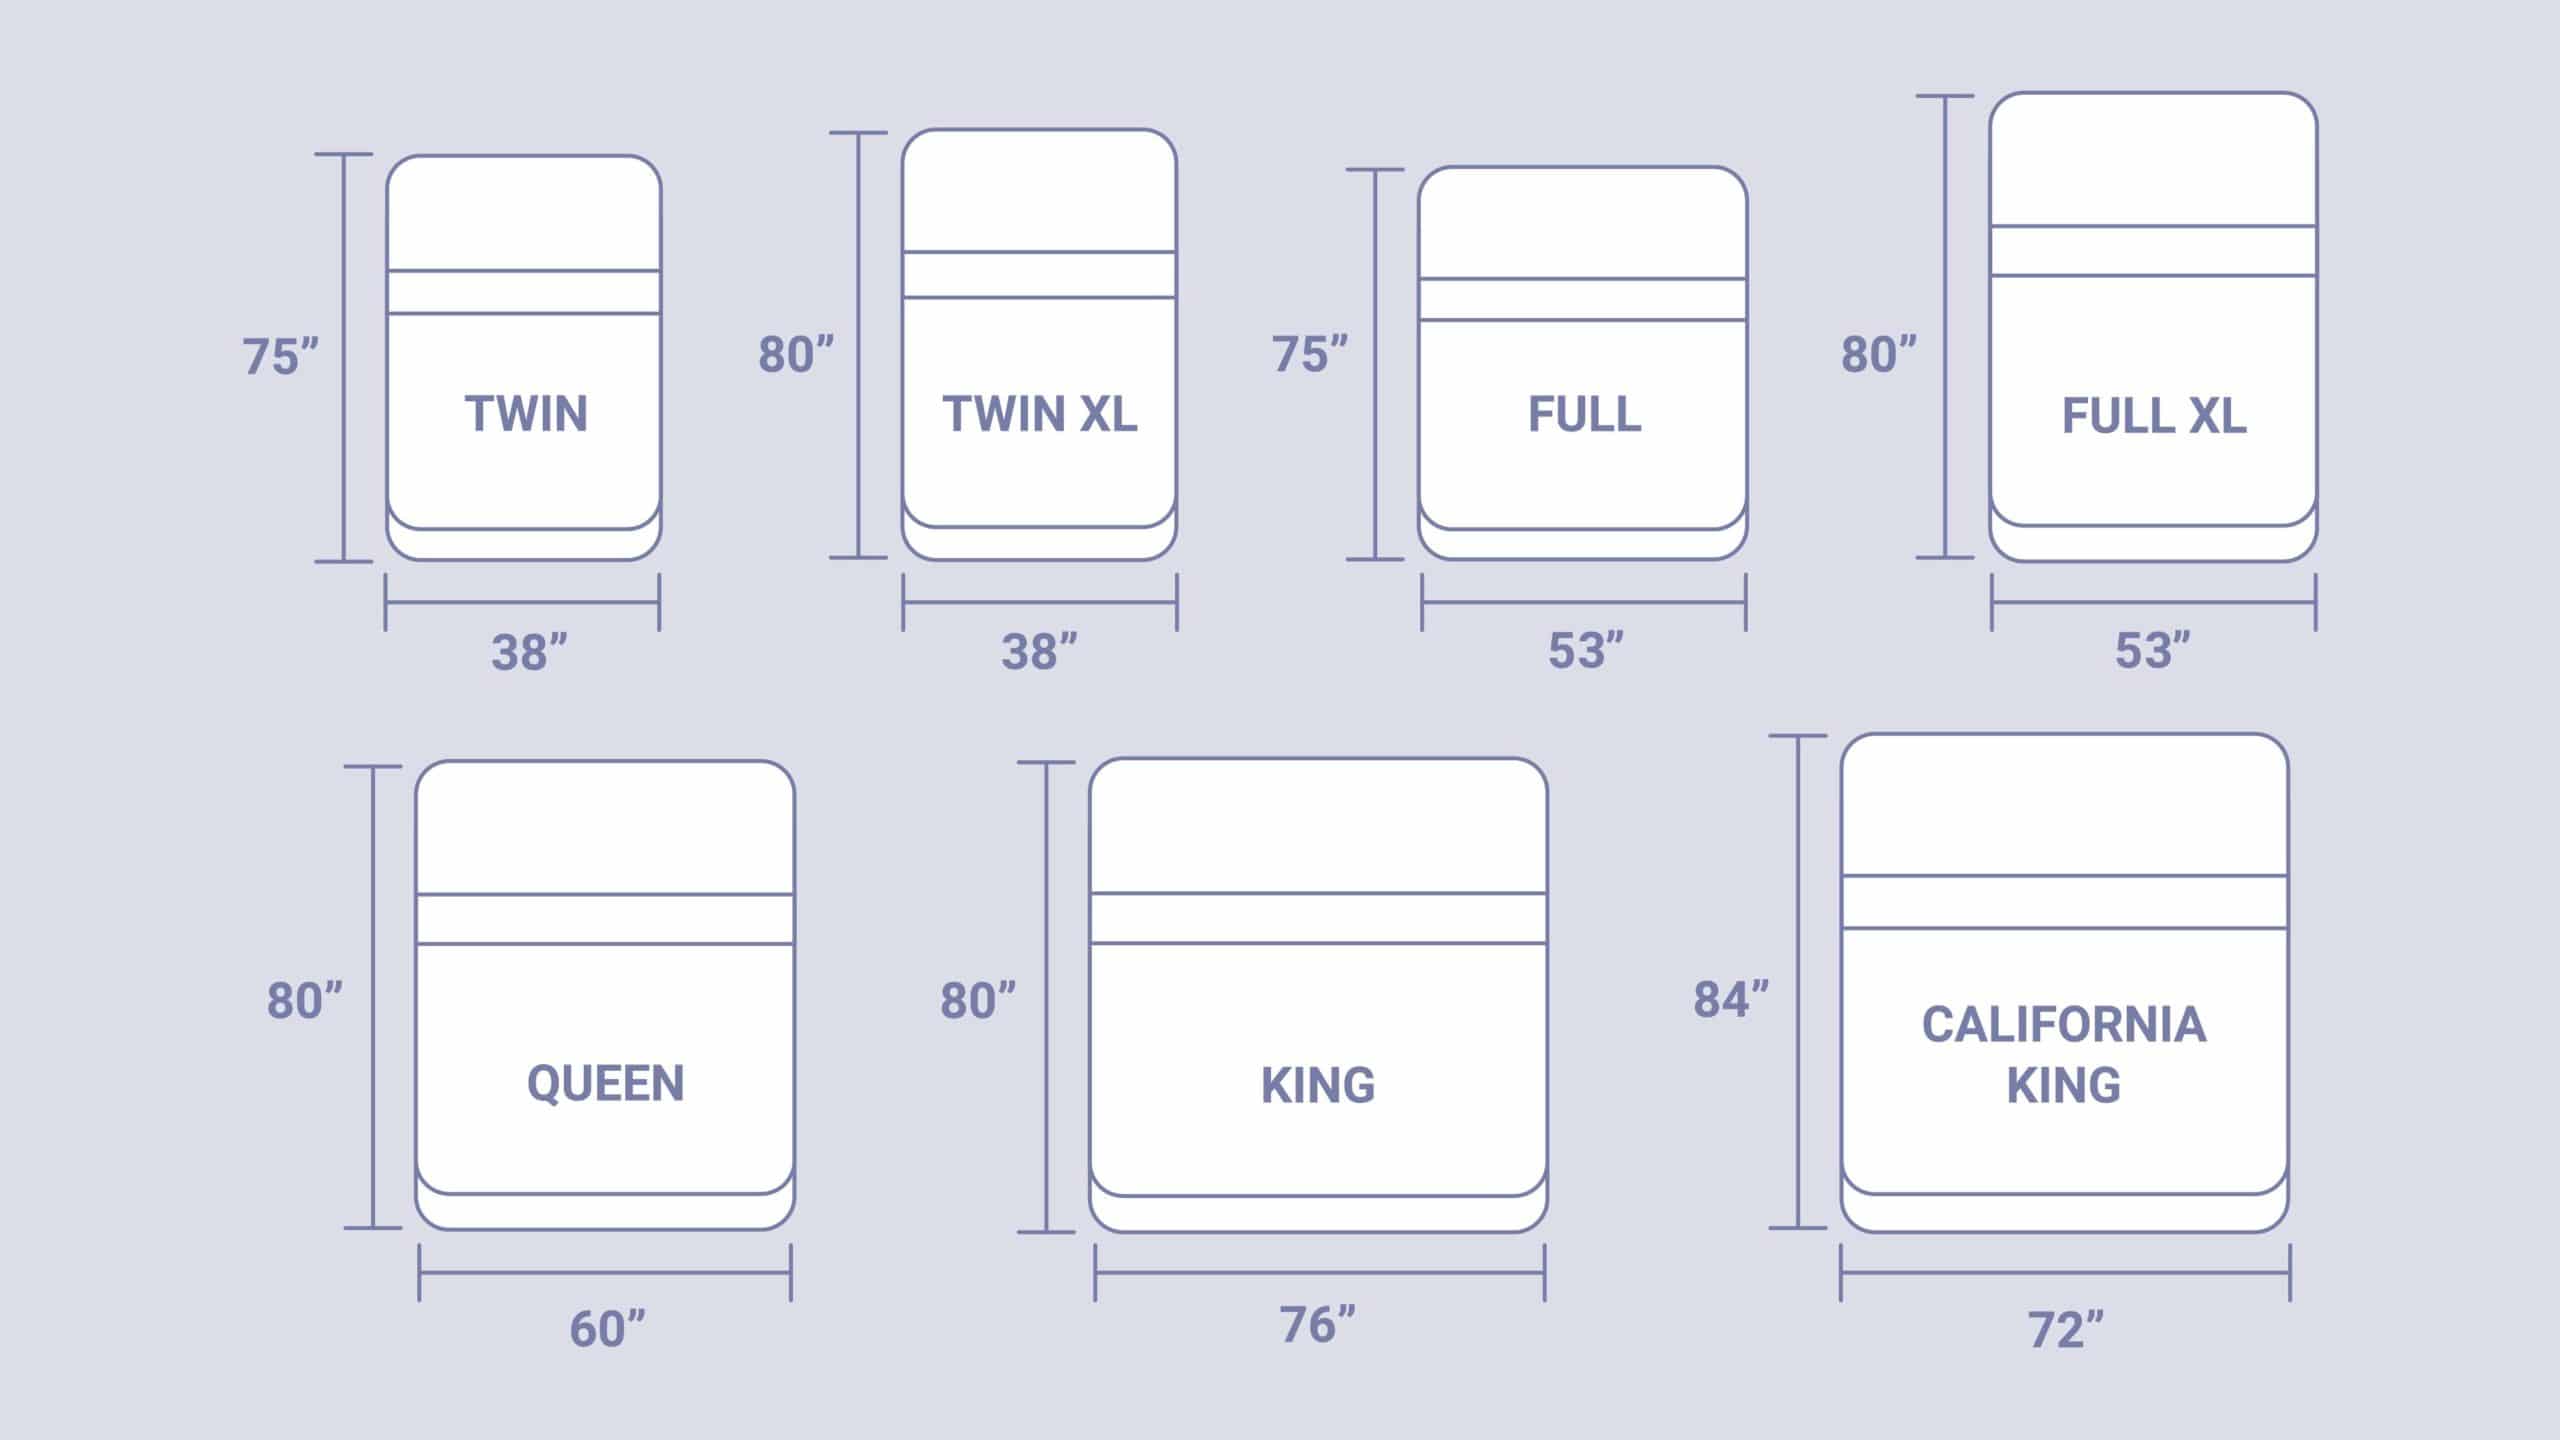 Mattress Sizes And Dimensions Guide, Is A King Size Bed Wider Or Longer